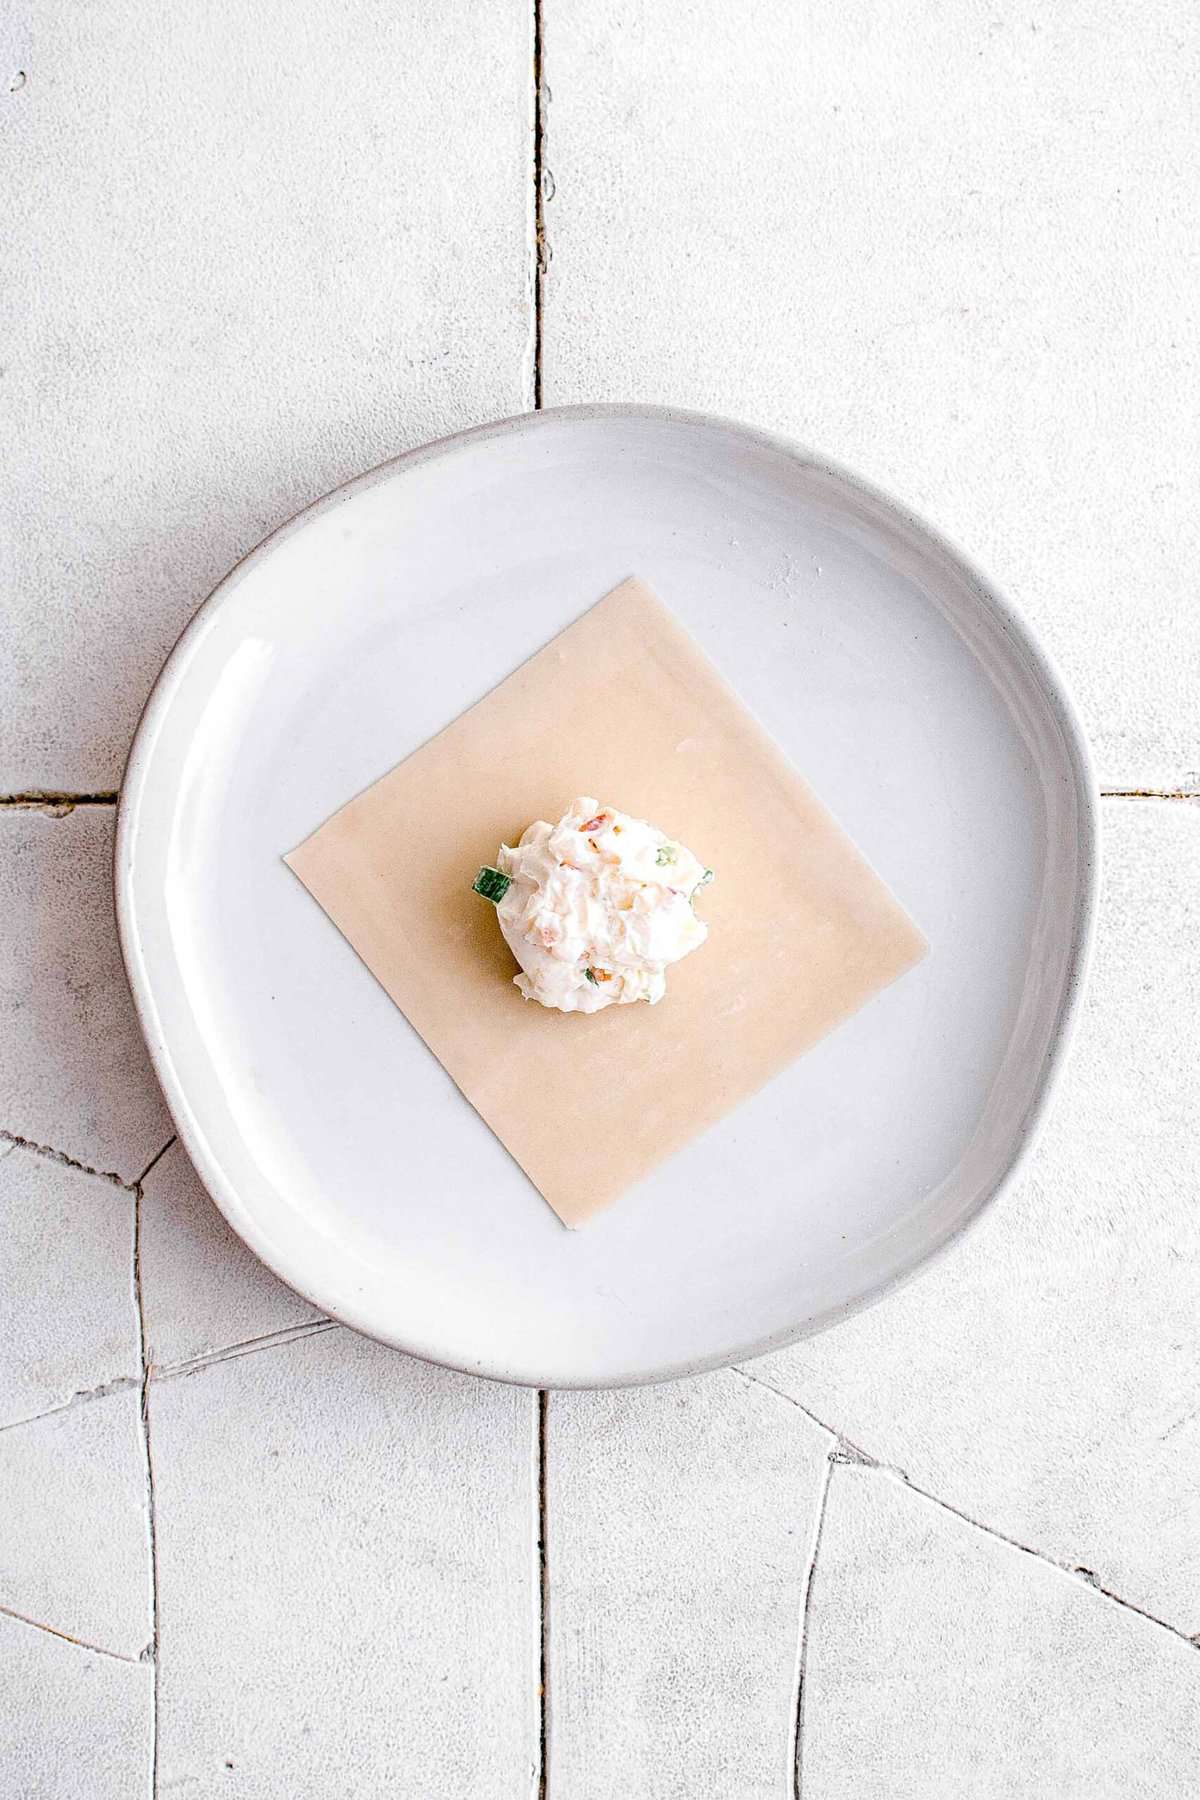 two teaspoons of crab rangoon filling in the center of a wonton wrapper on a white plate set on top of cracked grey tiles